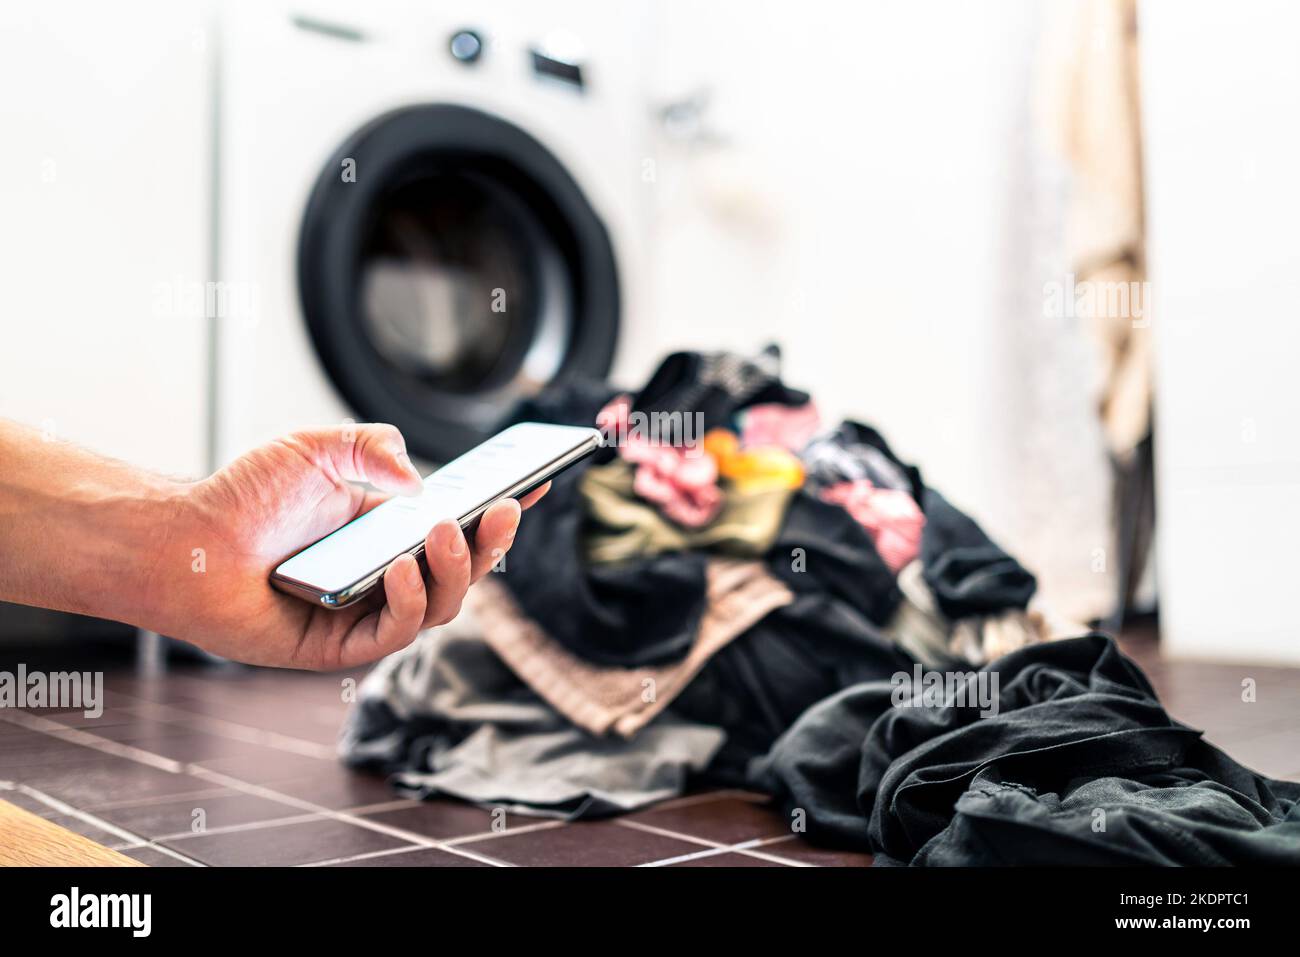 Washing machine, phone and laundry. Smart home technology and smartphone. Person using cellphone or texting while doing house chores. Stock Photo